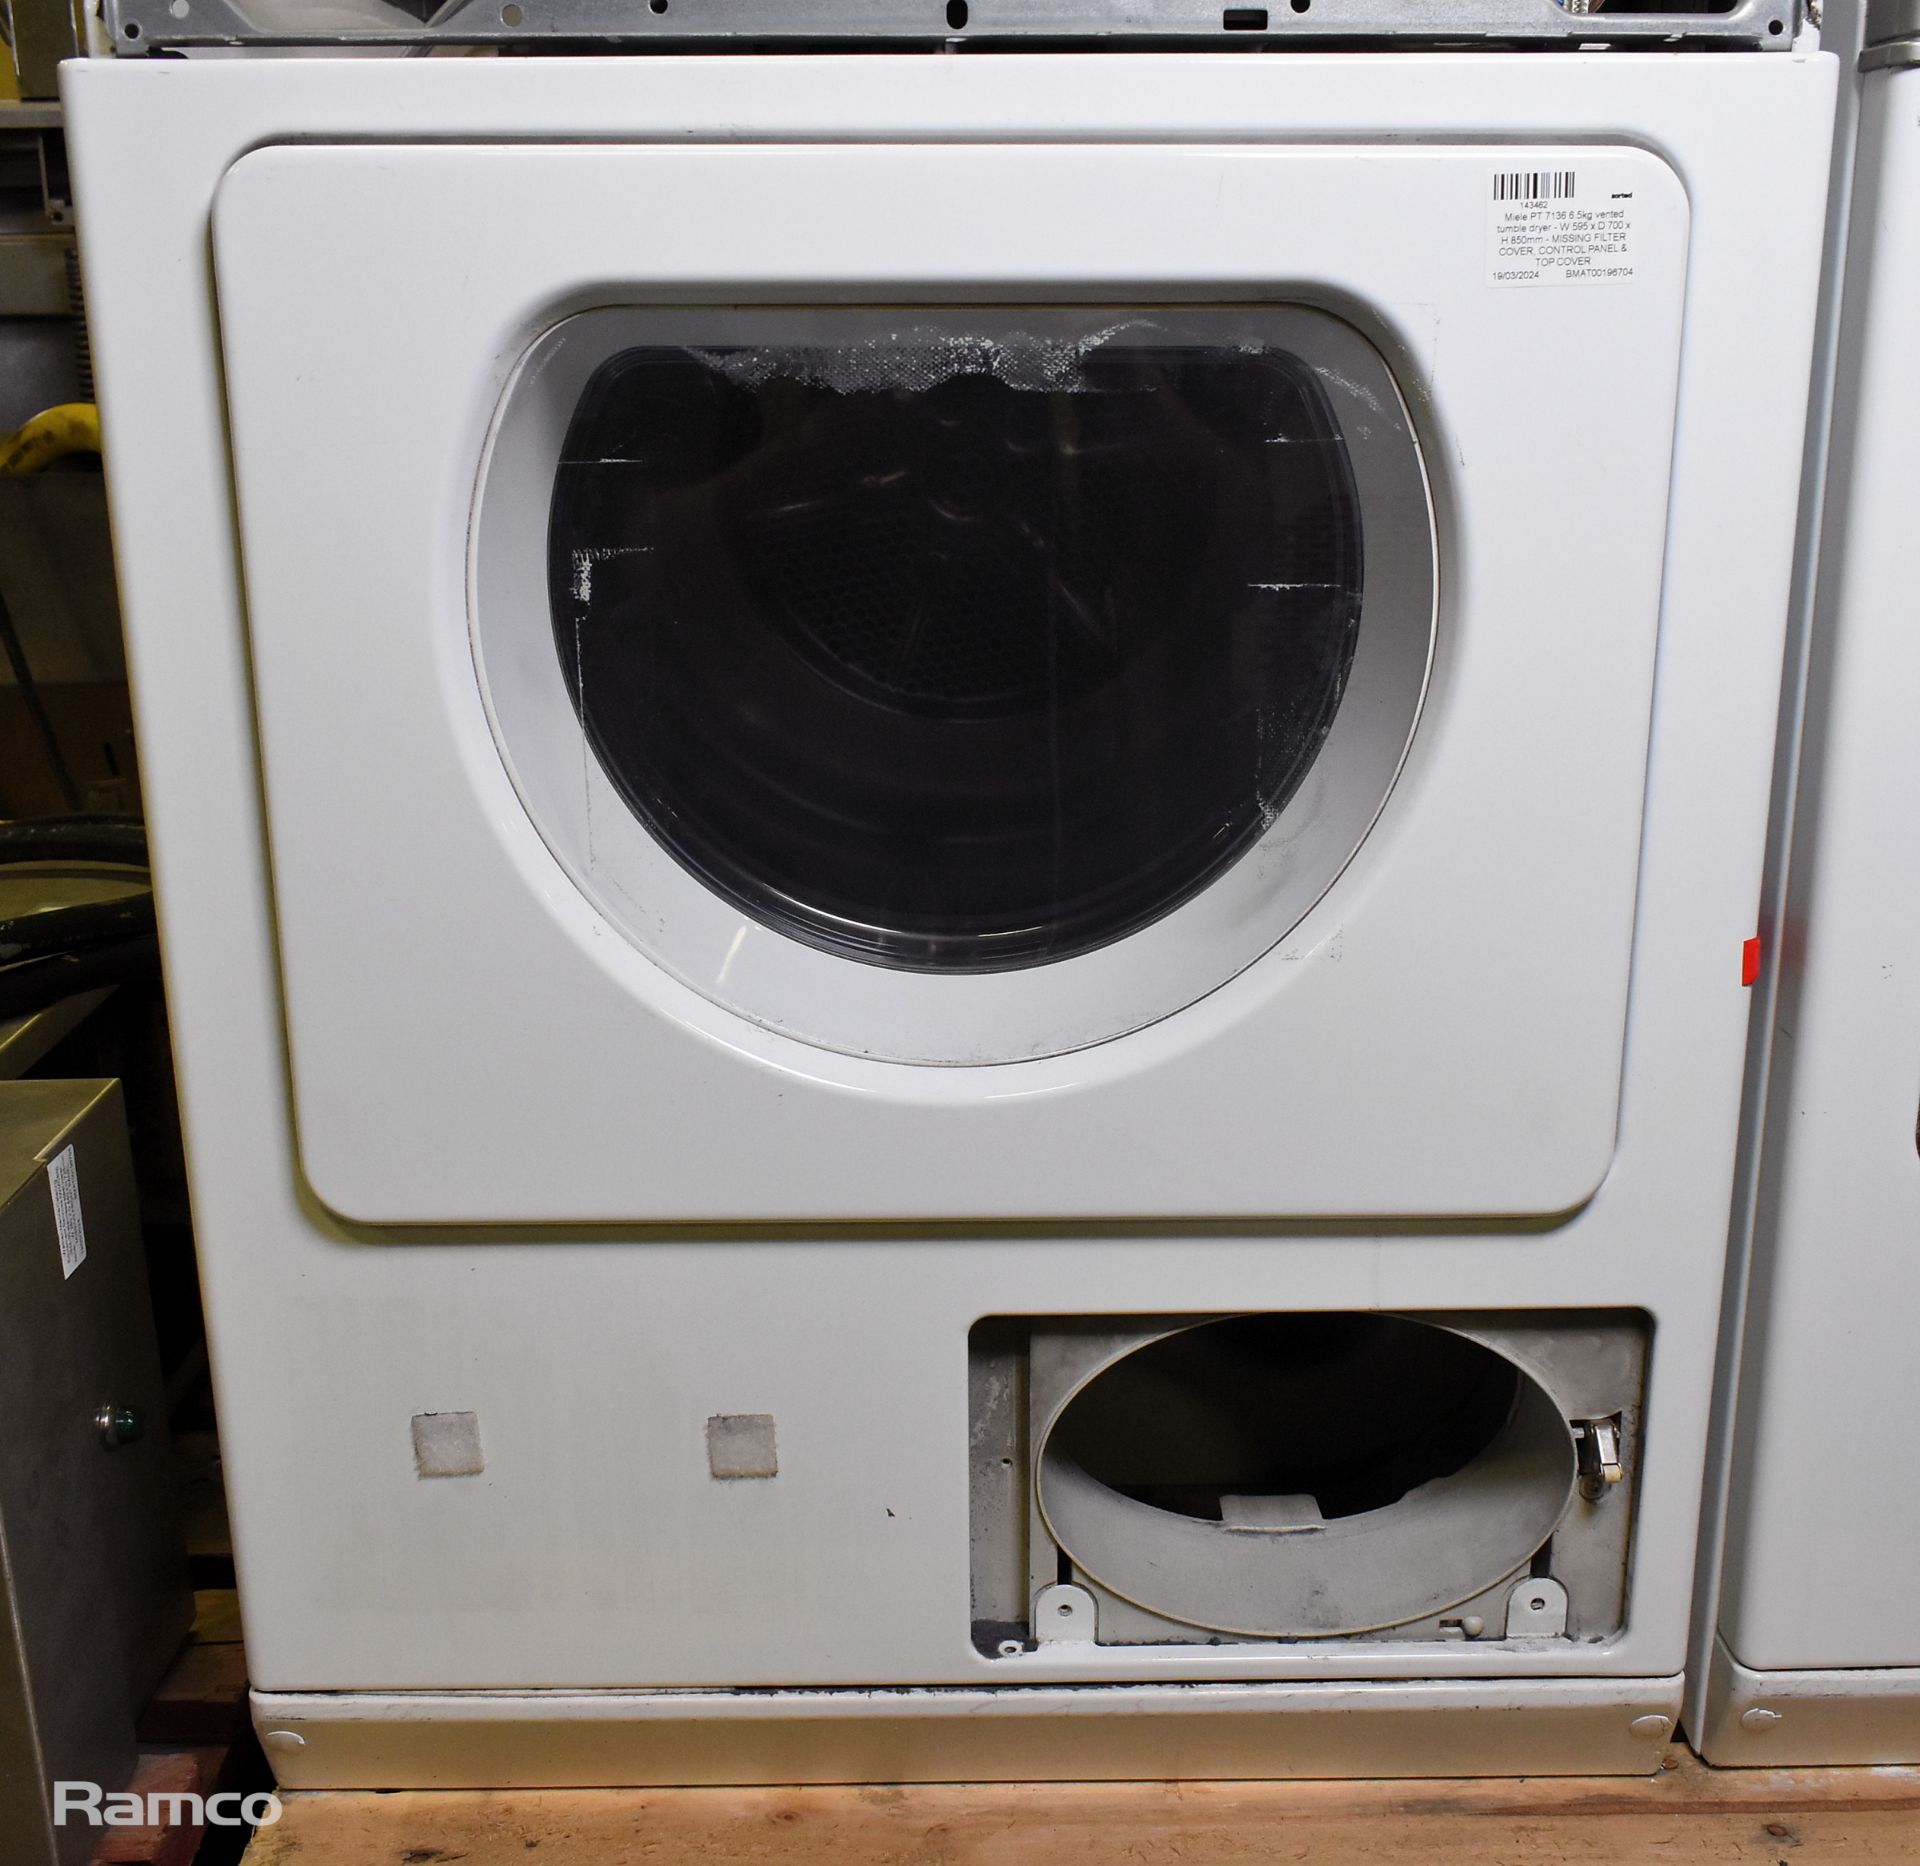 Miele PT 7136 6.5kg vented tumble dryer - W 595 x D 700 x H 850mm - MISSING FILTER COVER - Image 3 of 4